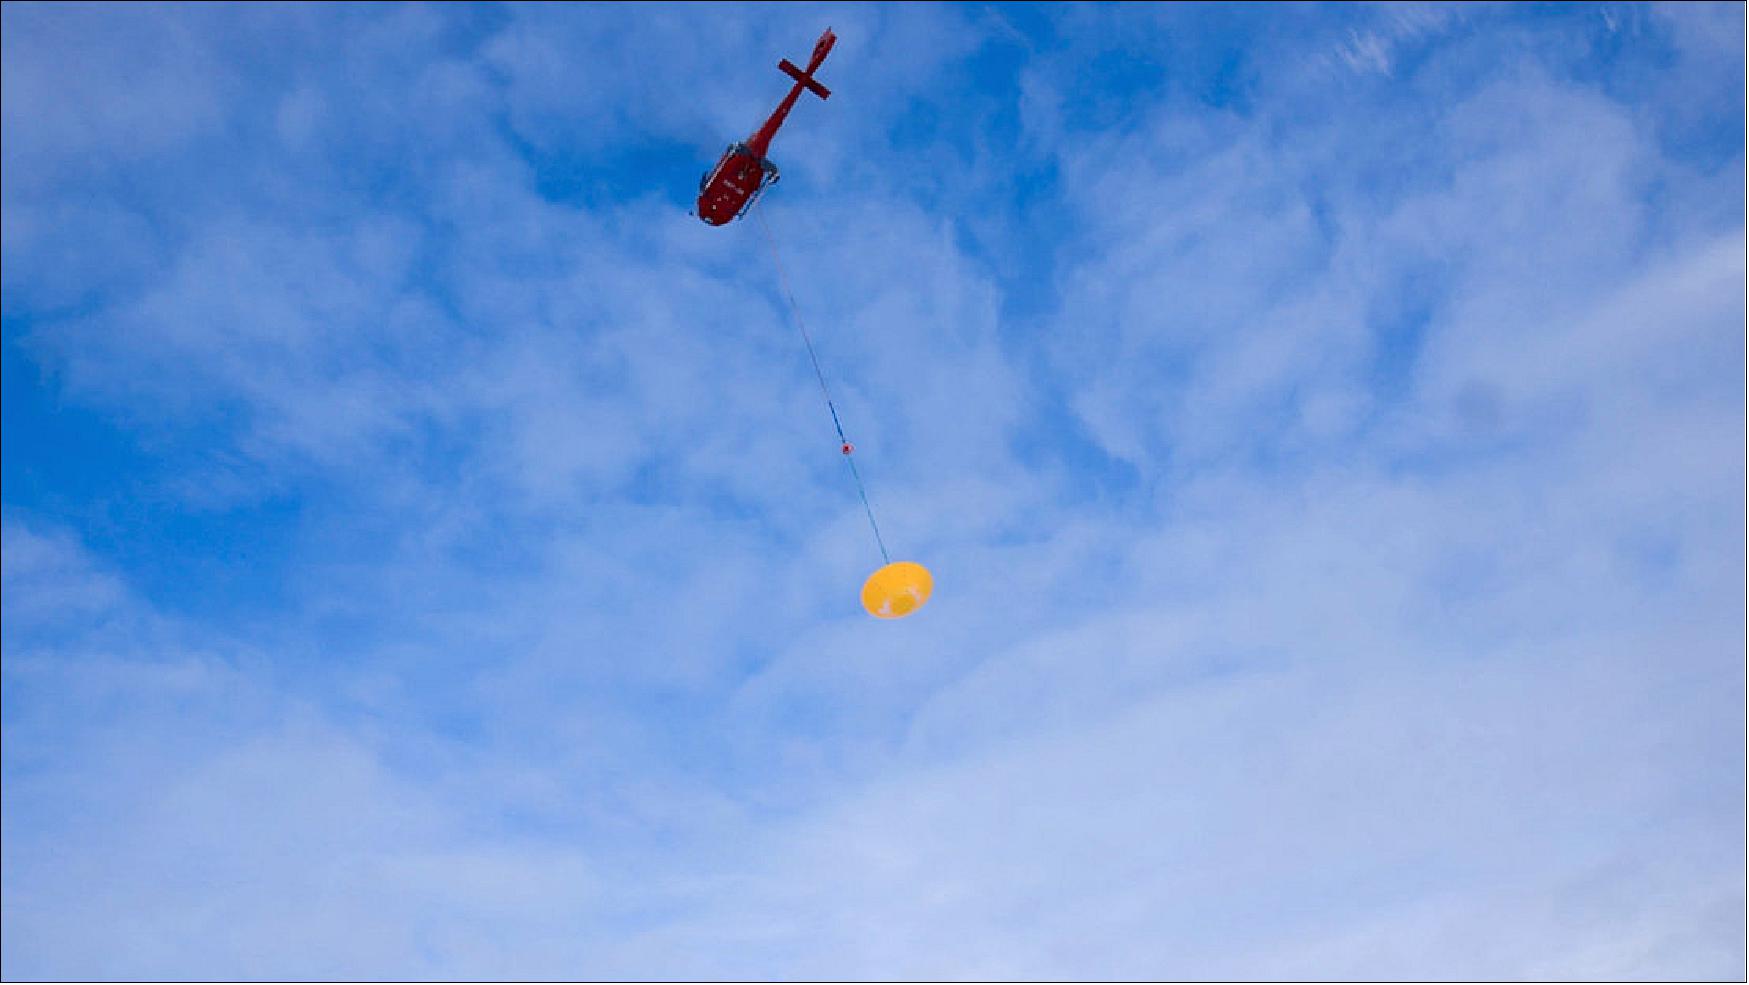 Figure 92: A helicopter carries a drop test vehicle to an altitude of 1.2 km before releasing it to monitor the deployment of the second stage main parachute, as part of a series of tests to prepare for the upcoming ExoMars mission (image credit: ESA/I. Barel)